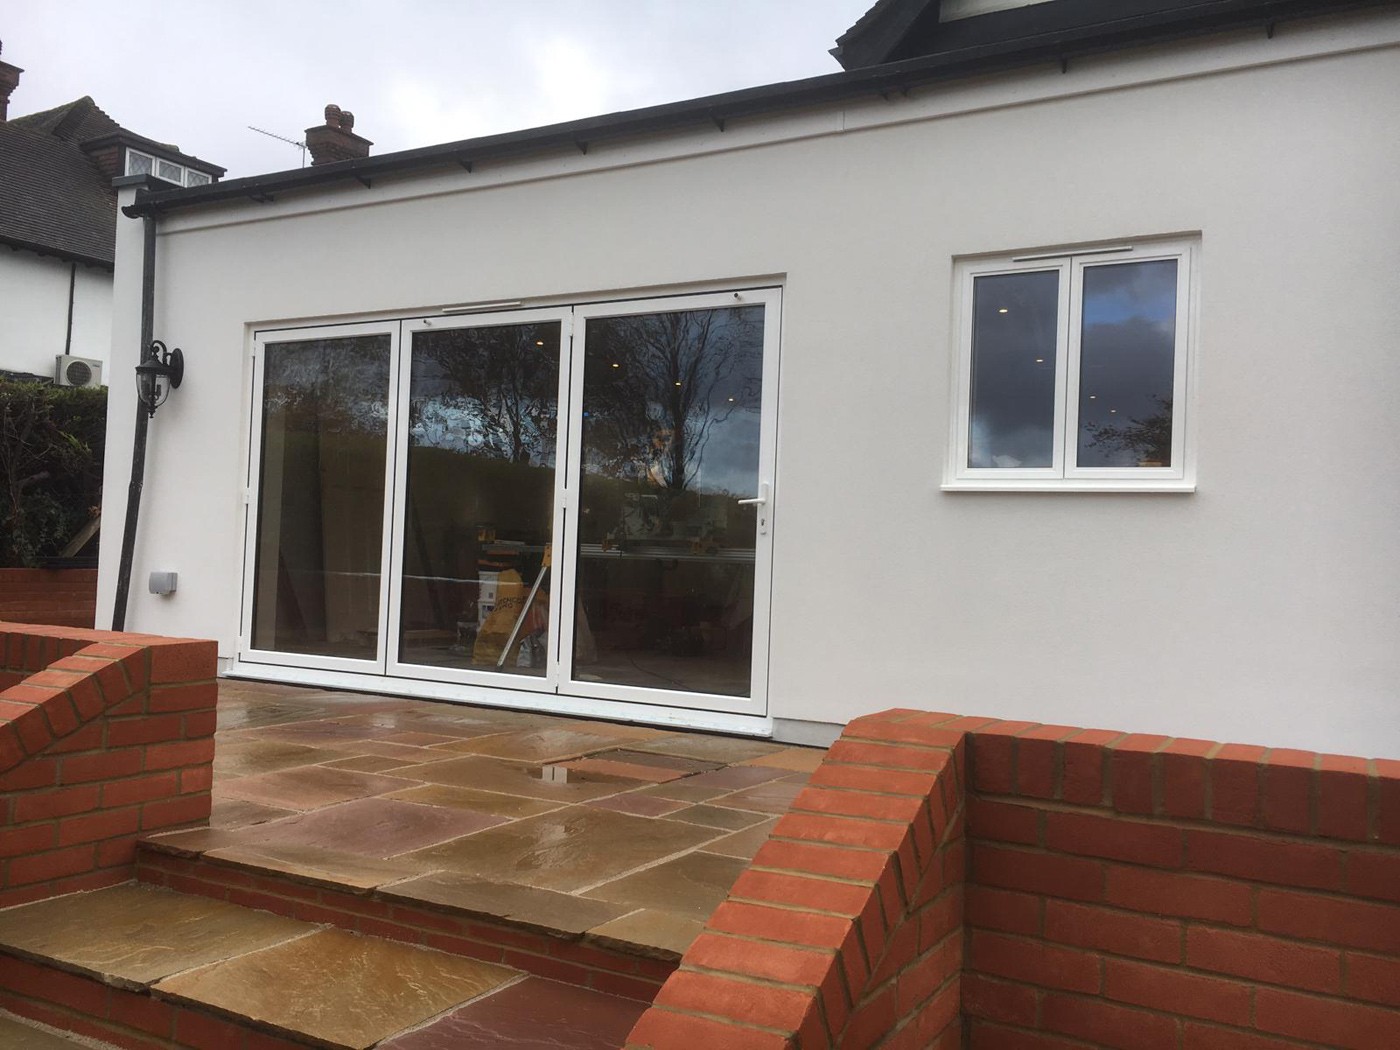 New windows & doors for home extension in Surrey | Your Price Windows